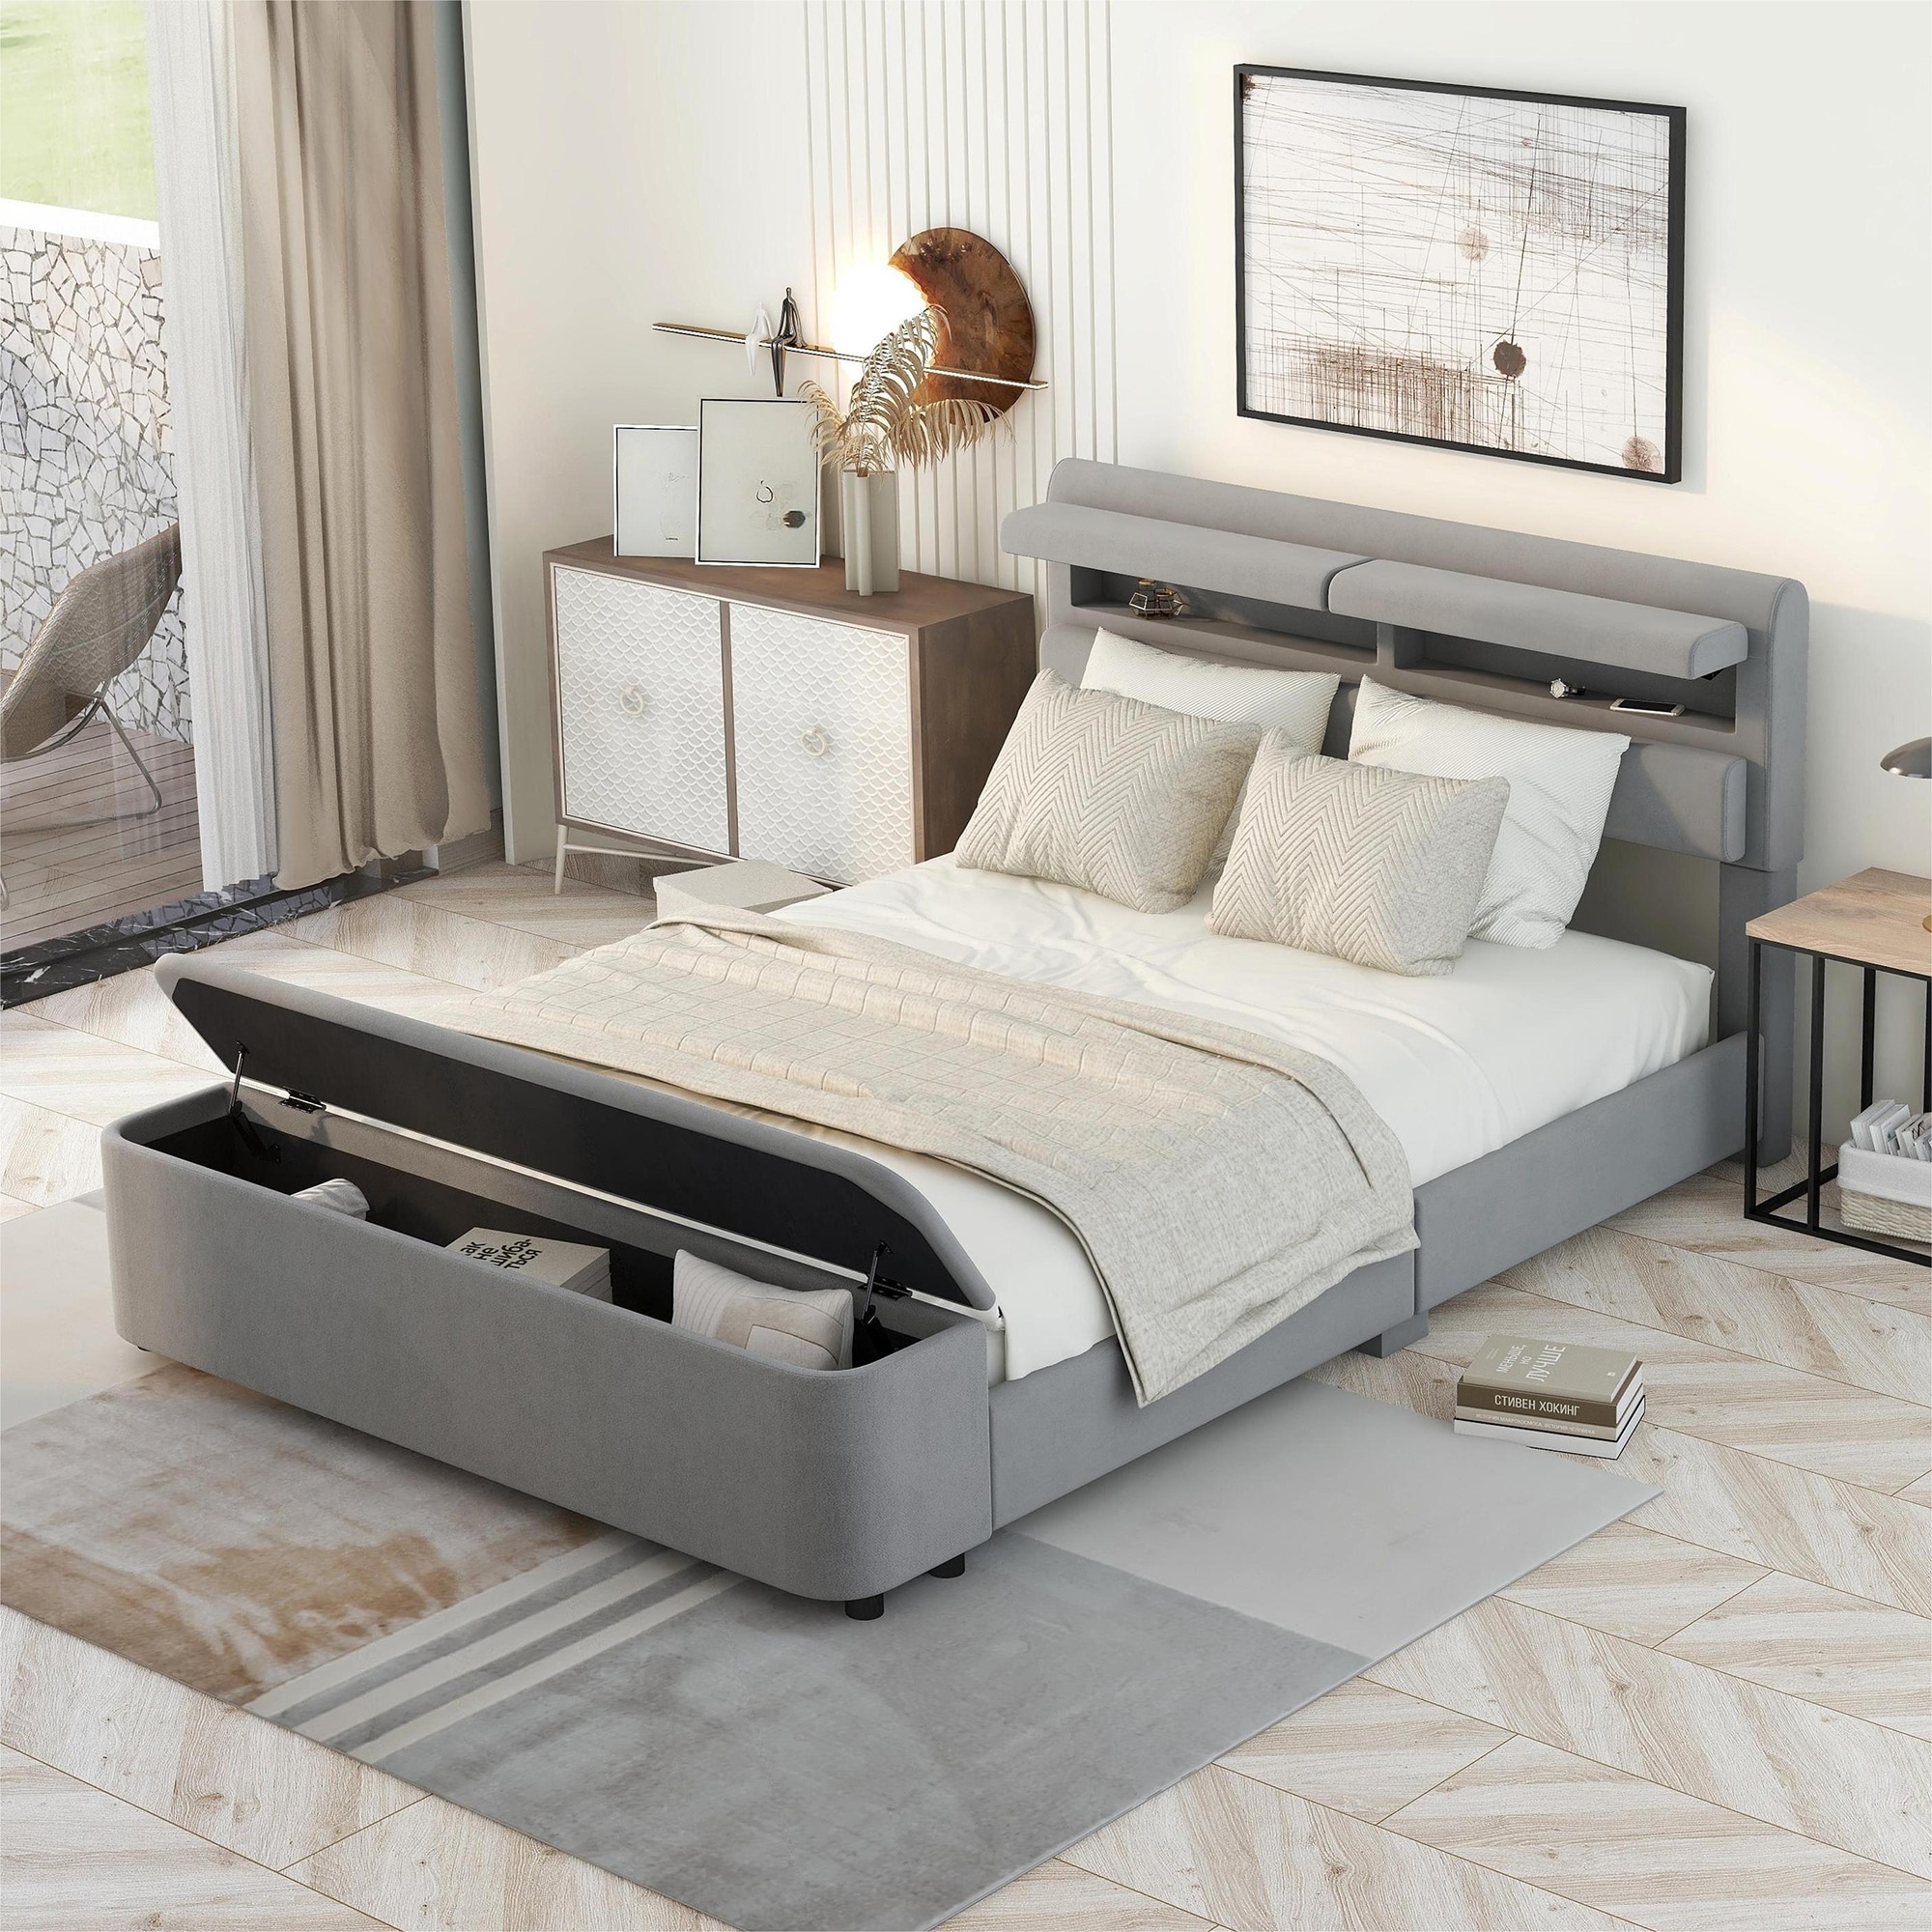 Full Size Upholstered Platform Bed With Storage Headboard And Storage Bench